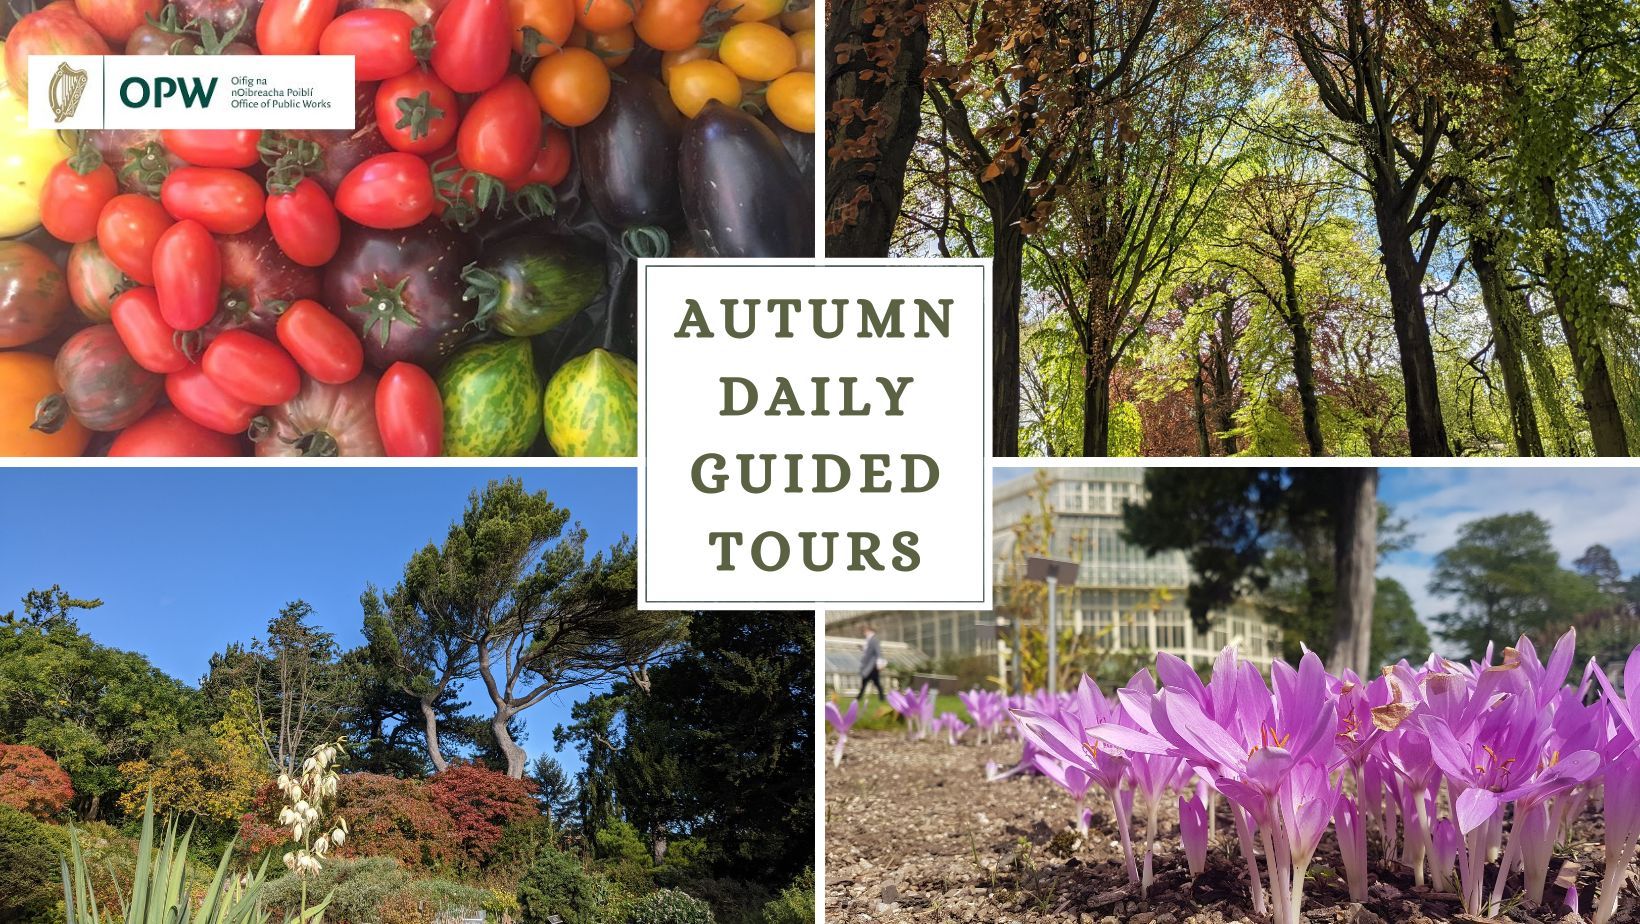 Four images, one of red orange, purple and green tomatoes, some of them striped, another image looking up into a bright green tree canopy, another of the rock garden with a windswept pine over head, and a fourth image is ca close up of bright purple autumn crocuses with the palm house in the background. There is a panel in the centre of the four images with Autumn Daily Guided Tours on it. 